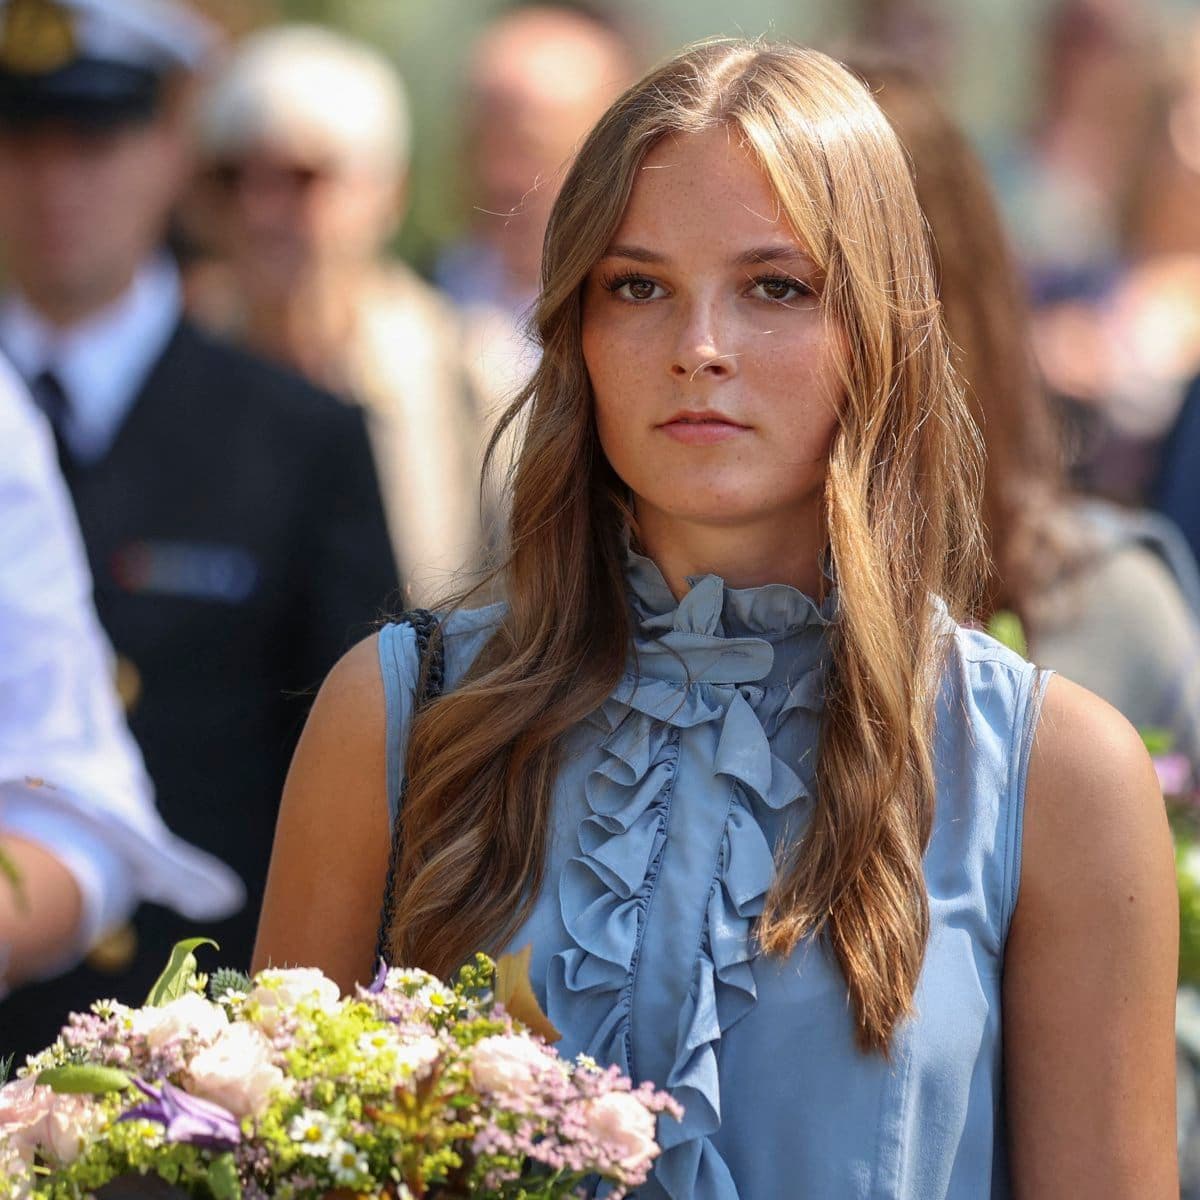 The Norwegian Royal House announced on Aug. 22 that Princess Ingrid Alexandra has tested positive for COVID 19